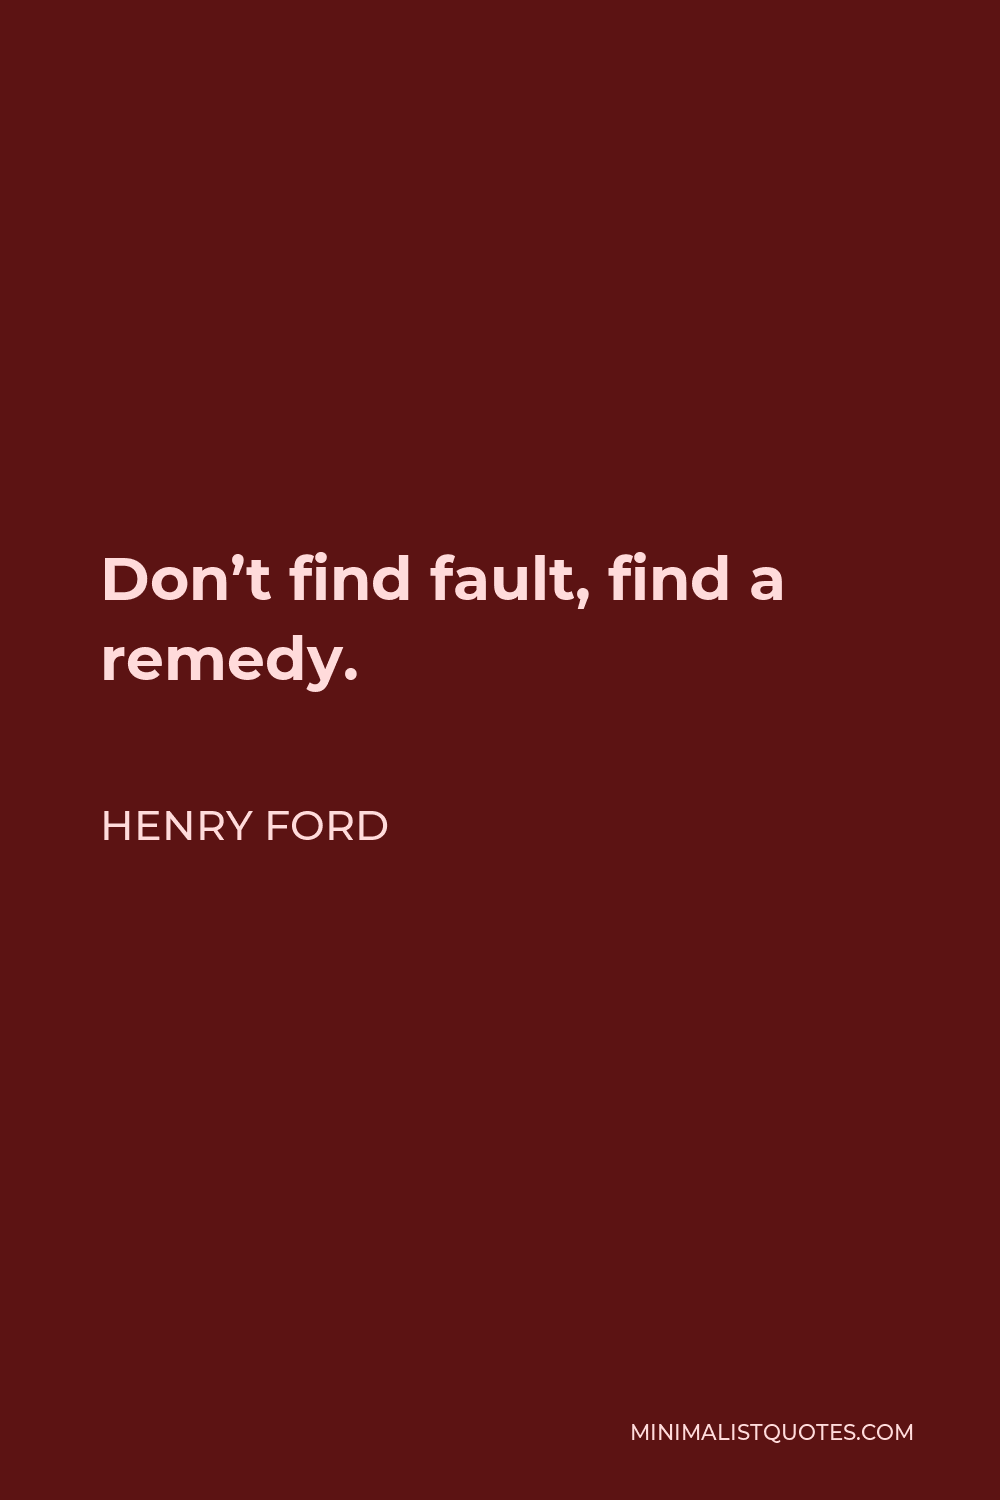 Henry Ford Quote - Don’t find fault, find a remedy.